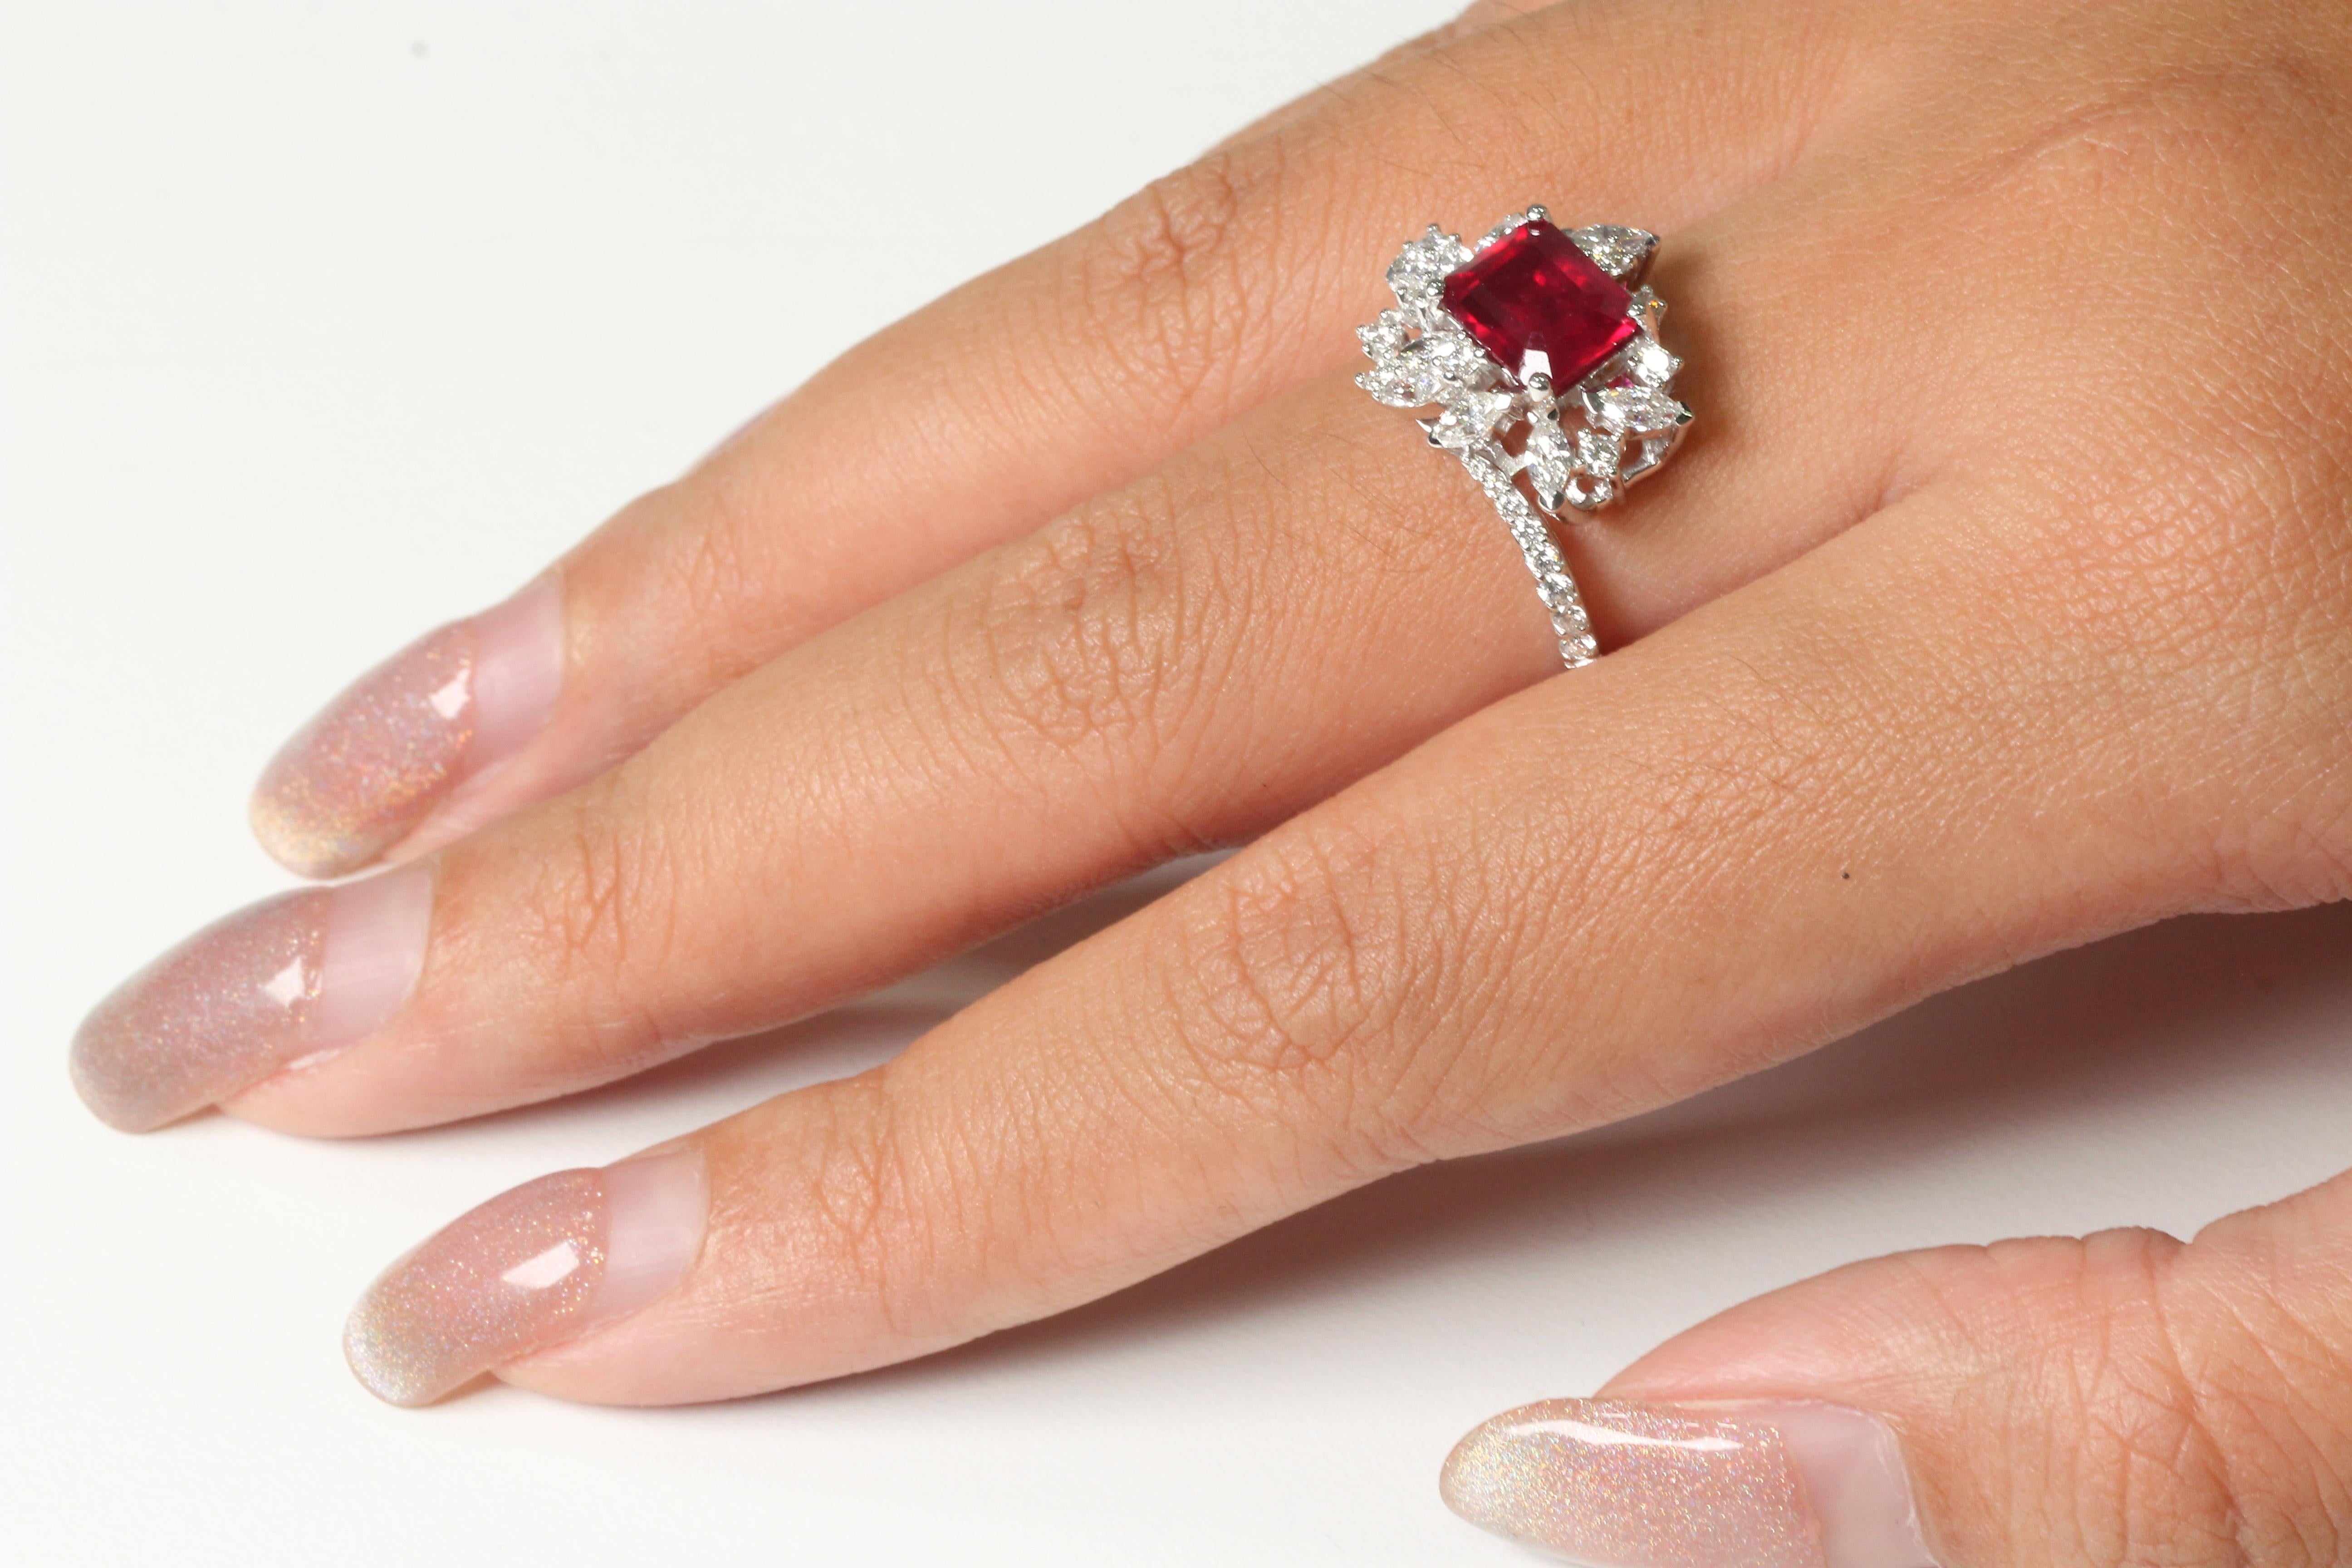 You may be sure to catch everyone's attention with this ring. A glass filled ruby stone and diamond stones are put in an antique style setting in this item. The mix of these materials, as well as the ring's design, set it out from the crowd and make